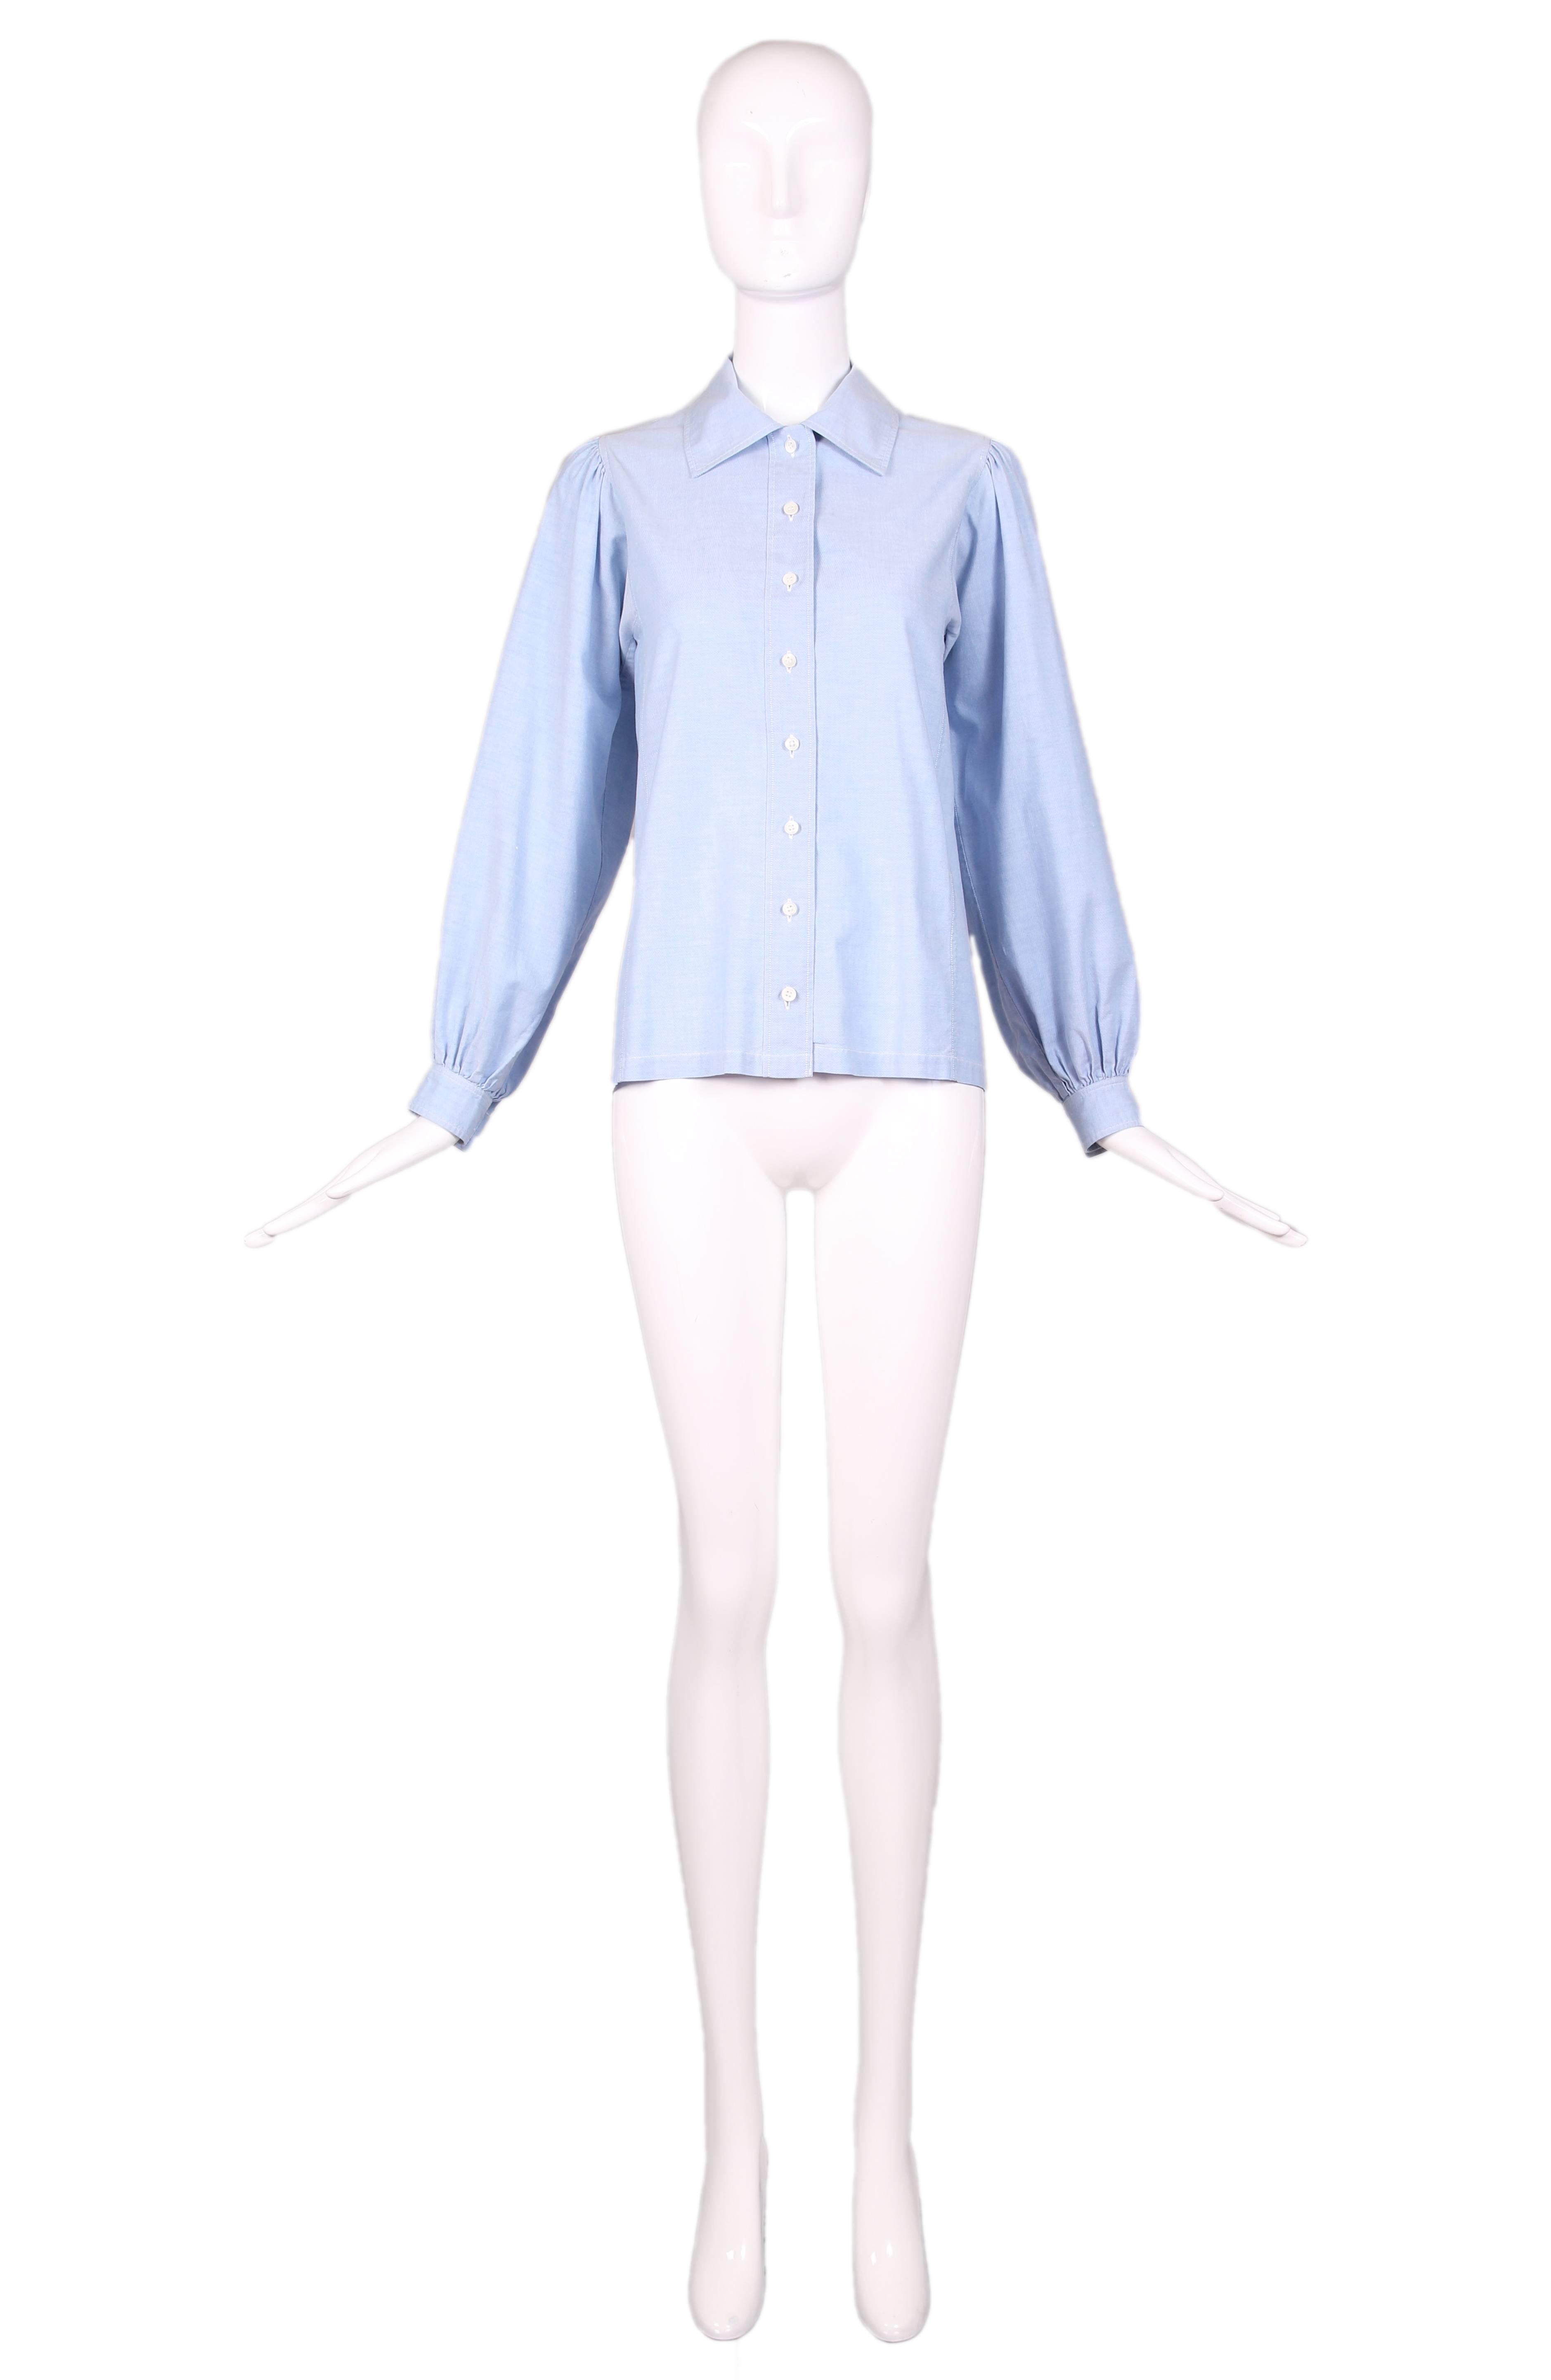 1970's Yves Saint Laurent YSL chambray button down shirt blouse. with oversize sleeves. In excellent condition. Size EU 40. 
MEASUREMENTS (in inches):
Bust - 36
Waist - 36
Length - 24